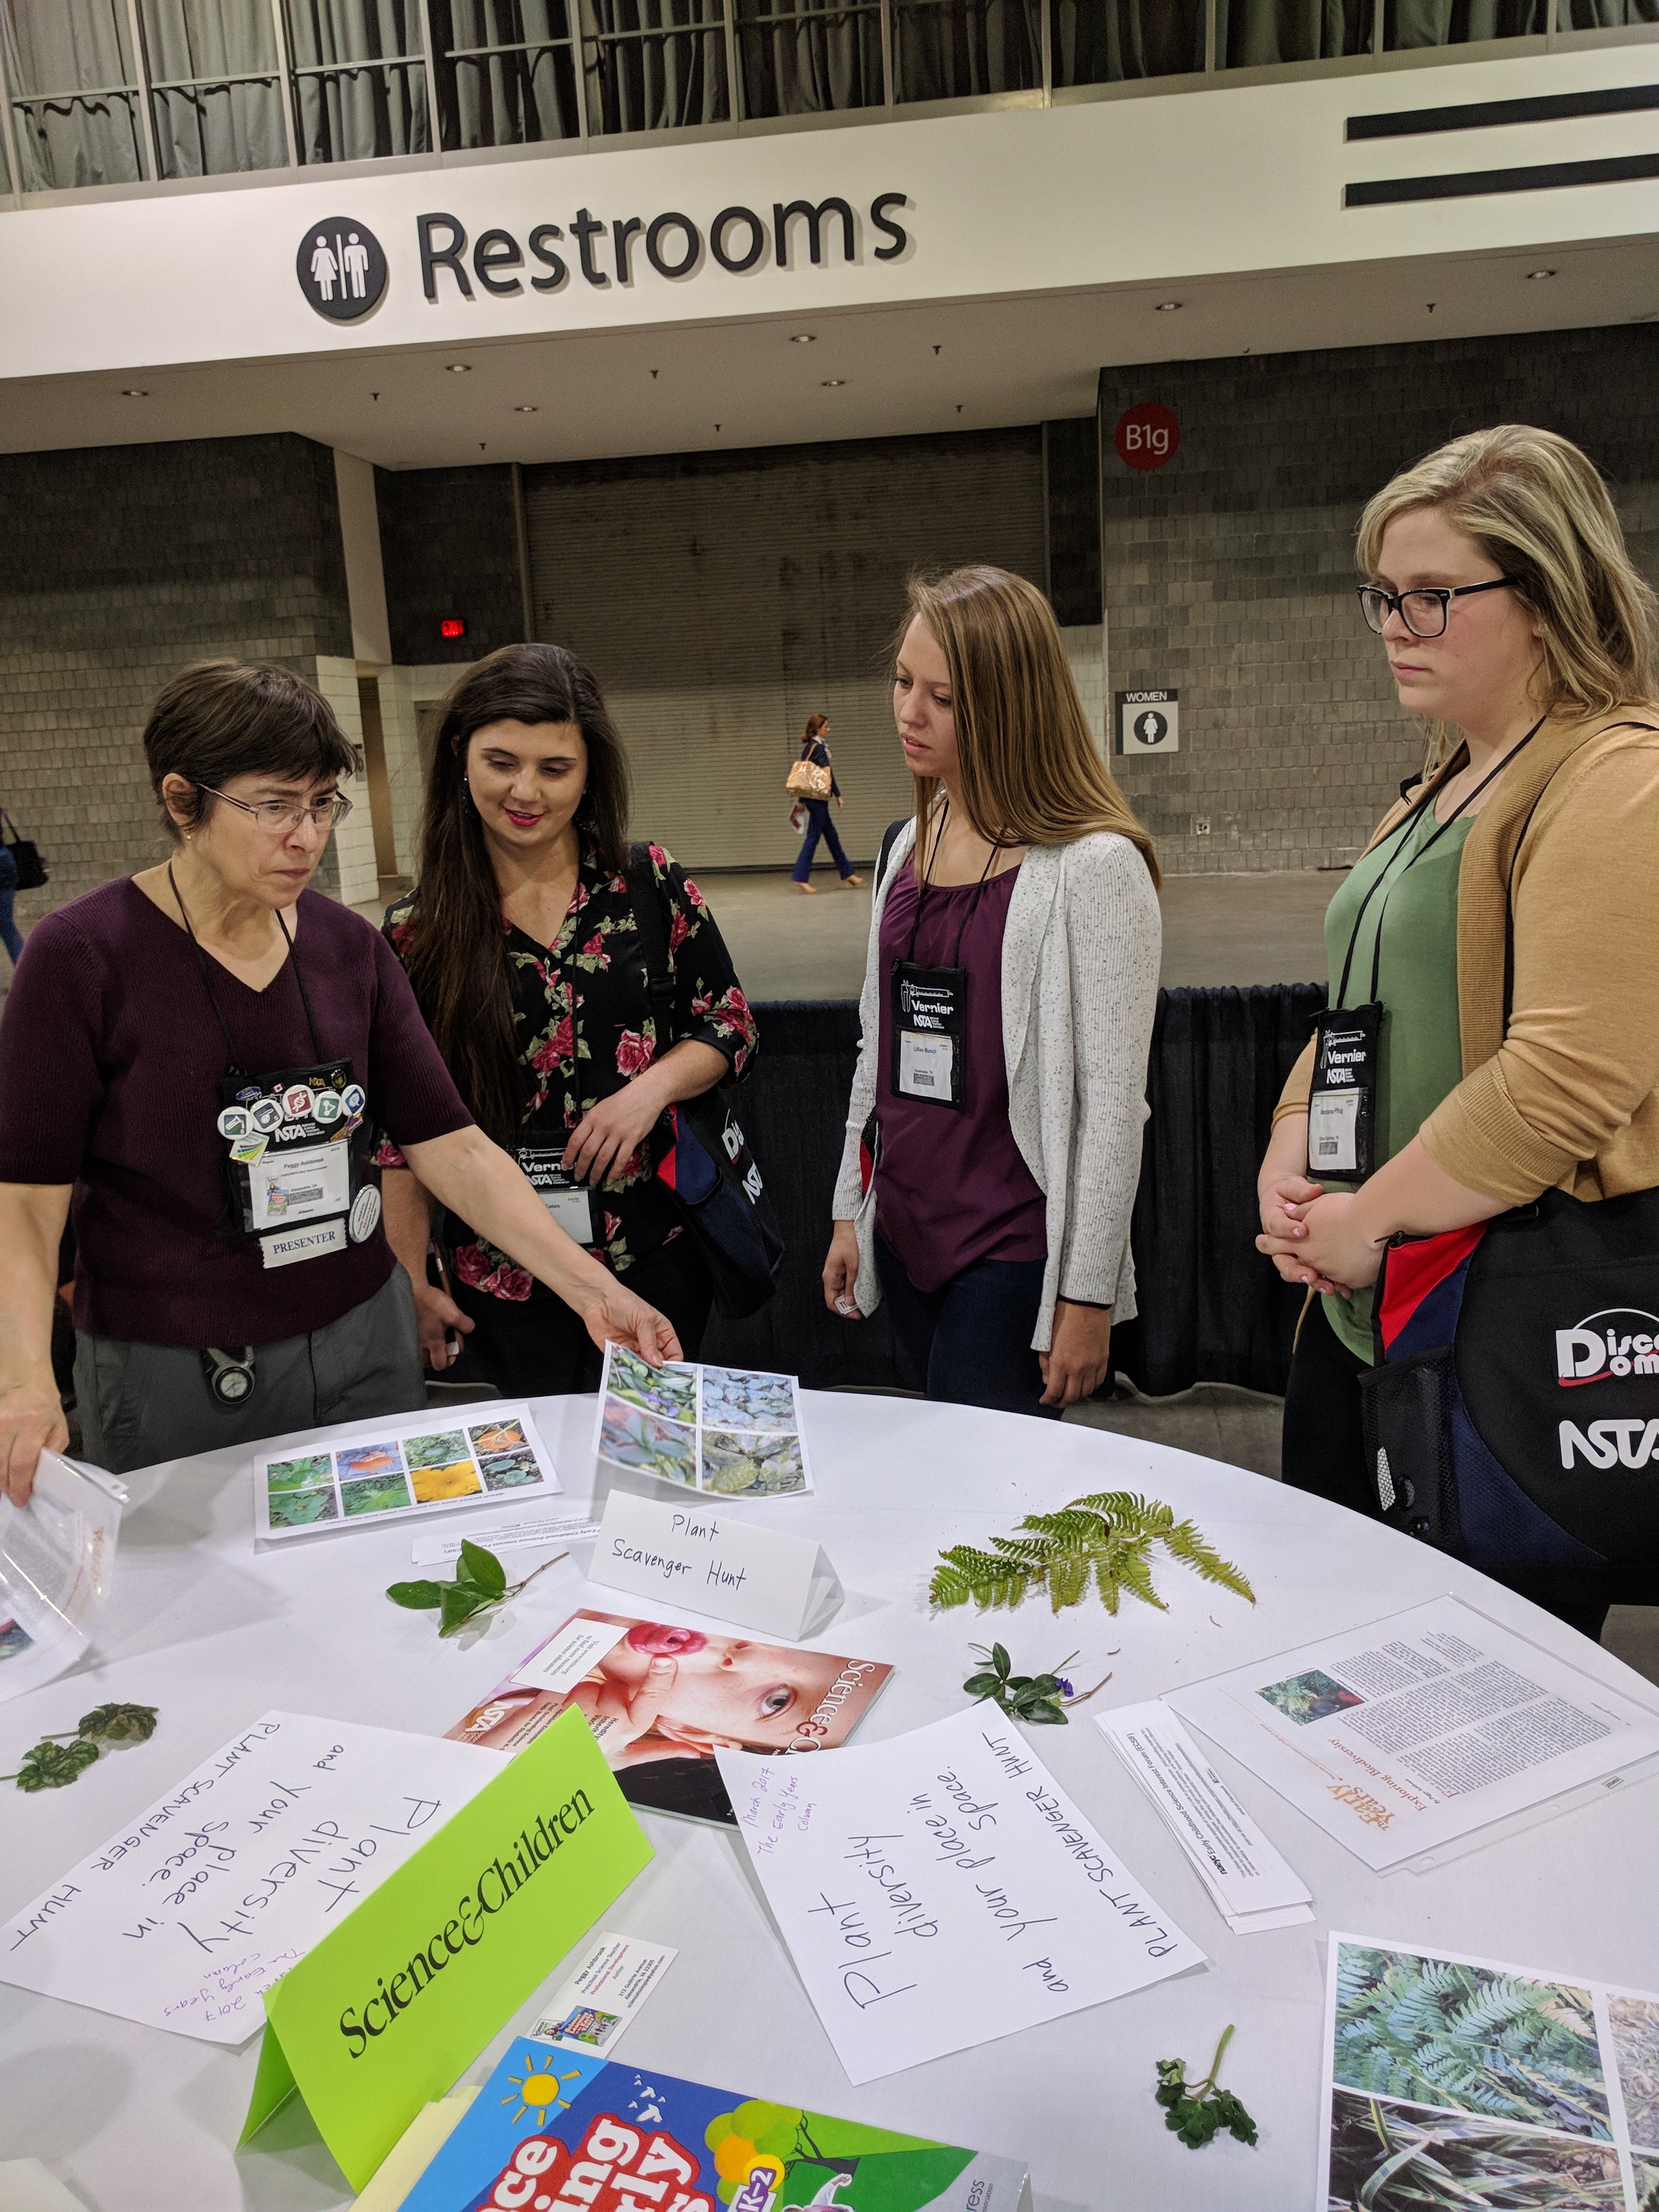 Peggy Ashbrook and participants discussing learning plant diversity through a plant scavenger hunt.